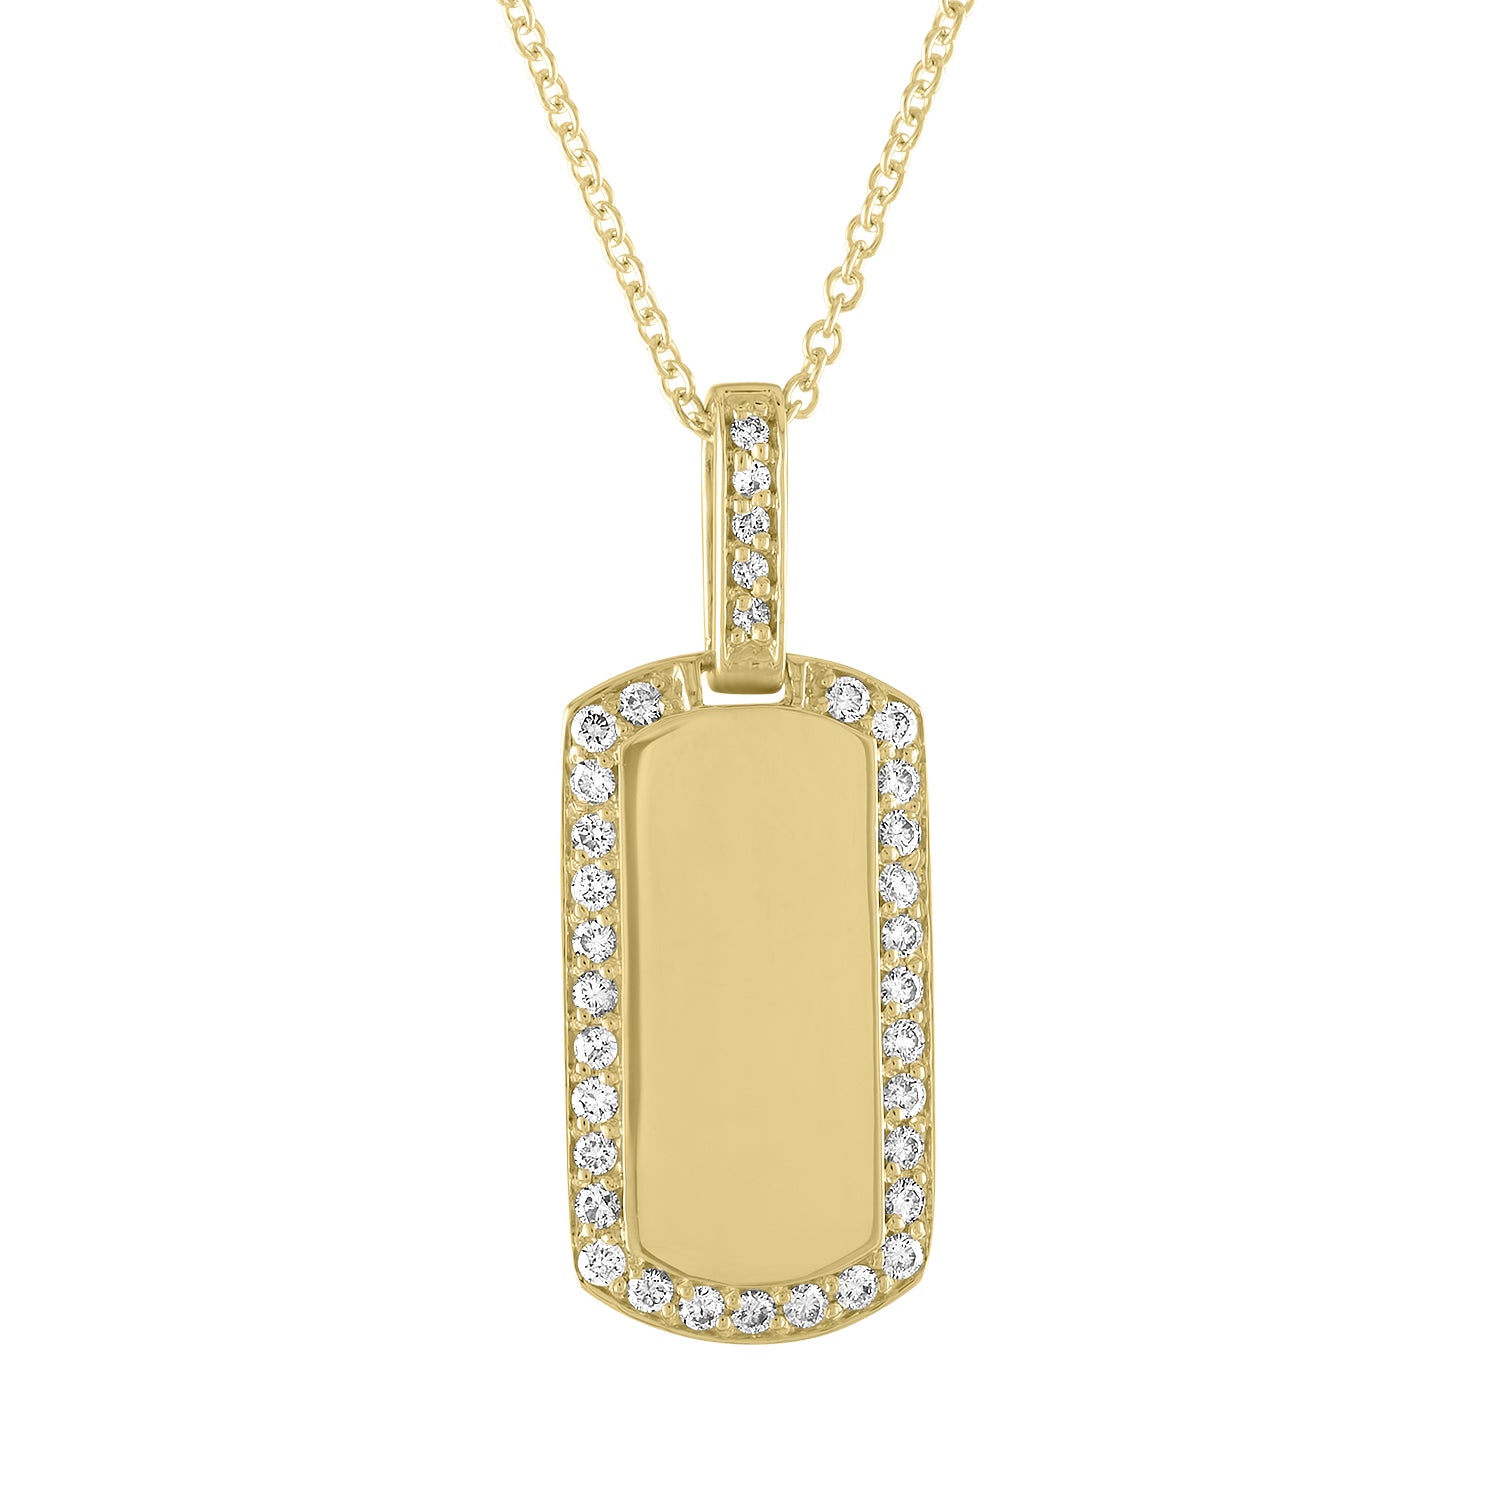 Yellow gold dog tag necklace with round diamonds around the border.